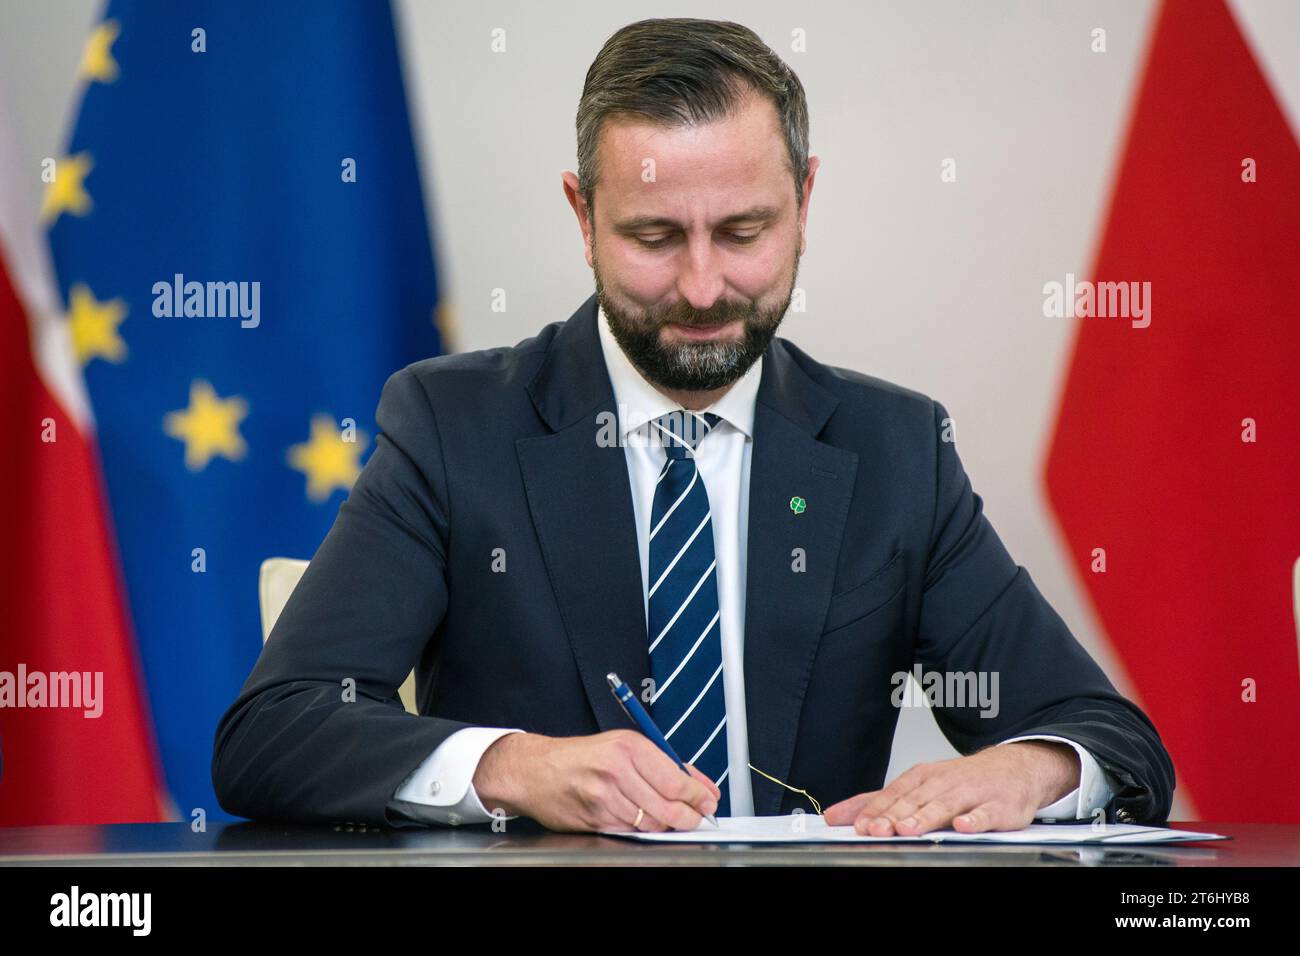 Wladyslaw Kosiniak-Kamysz, leader of the Polish People's Party, signs the coalition agreement in the Parliament. The leaders of Polish opposition parties have signed a coalition agreement that lays out a road map for governing the nation over the next four years. The parties collectively won a majority of votes in last month's parliamentary election. Their candidate to be the next prime minister is Donald Tusk, a former prime minister who leads the largest of the opposition parties, the centrist Civic Platform. Tusk said the parties worked to seal their agreement a day before the Independence Stock Photo